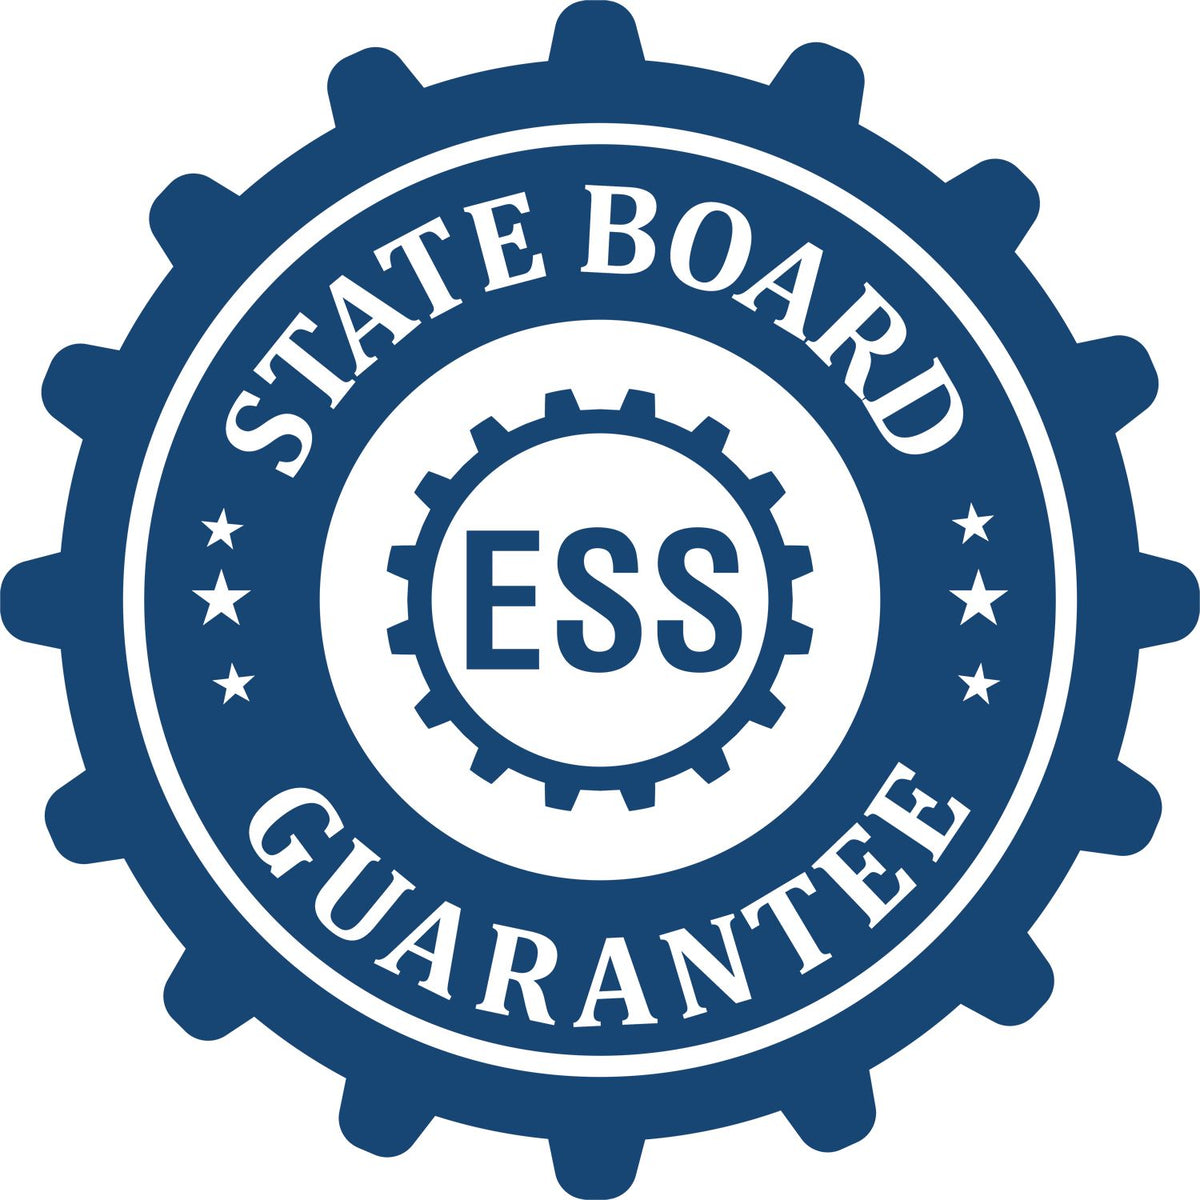 An emblem in a gear shape illustrating a state board guarantee for the Digital Wyoming PE Stamp and Electronic Seal for Wyoming Engineer product.